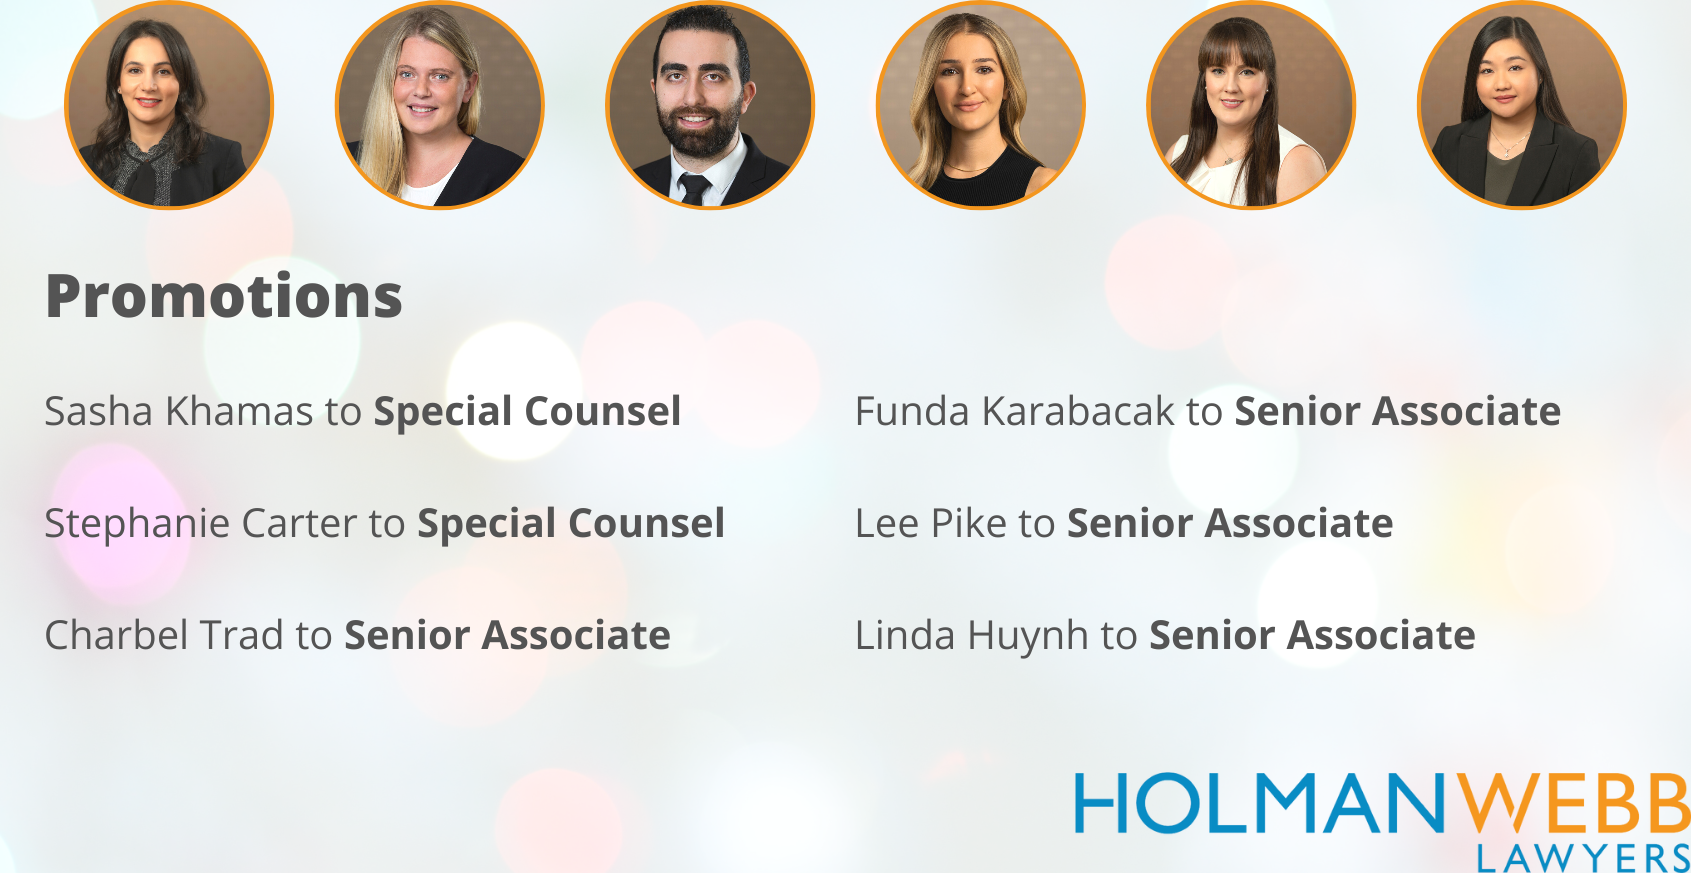 Holman Webb Lawyers is pleased to announce a range of promotions across our Sydney office – effective 1 July 2022